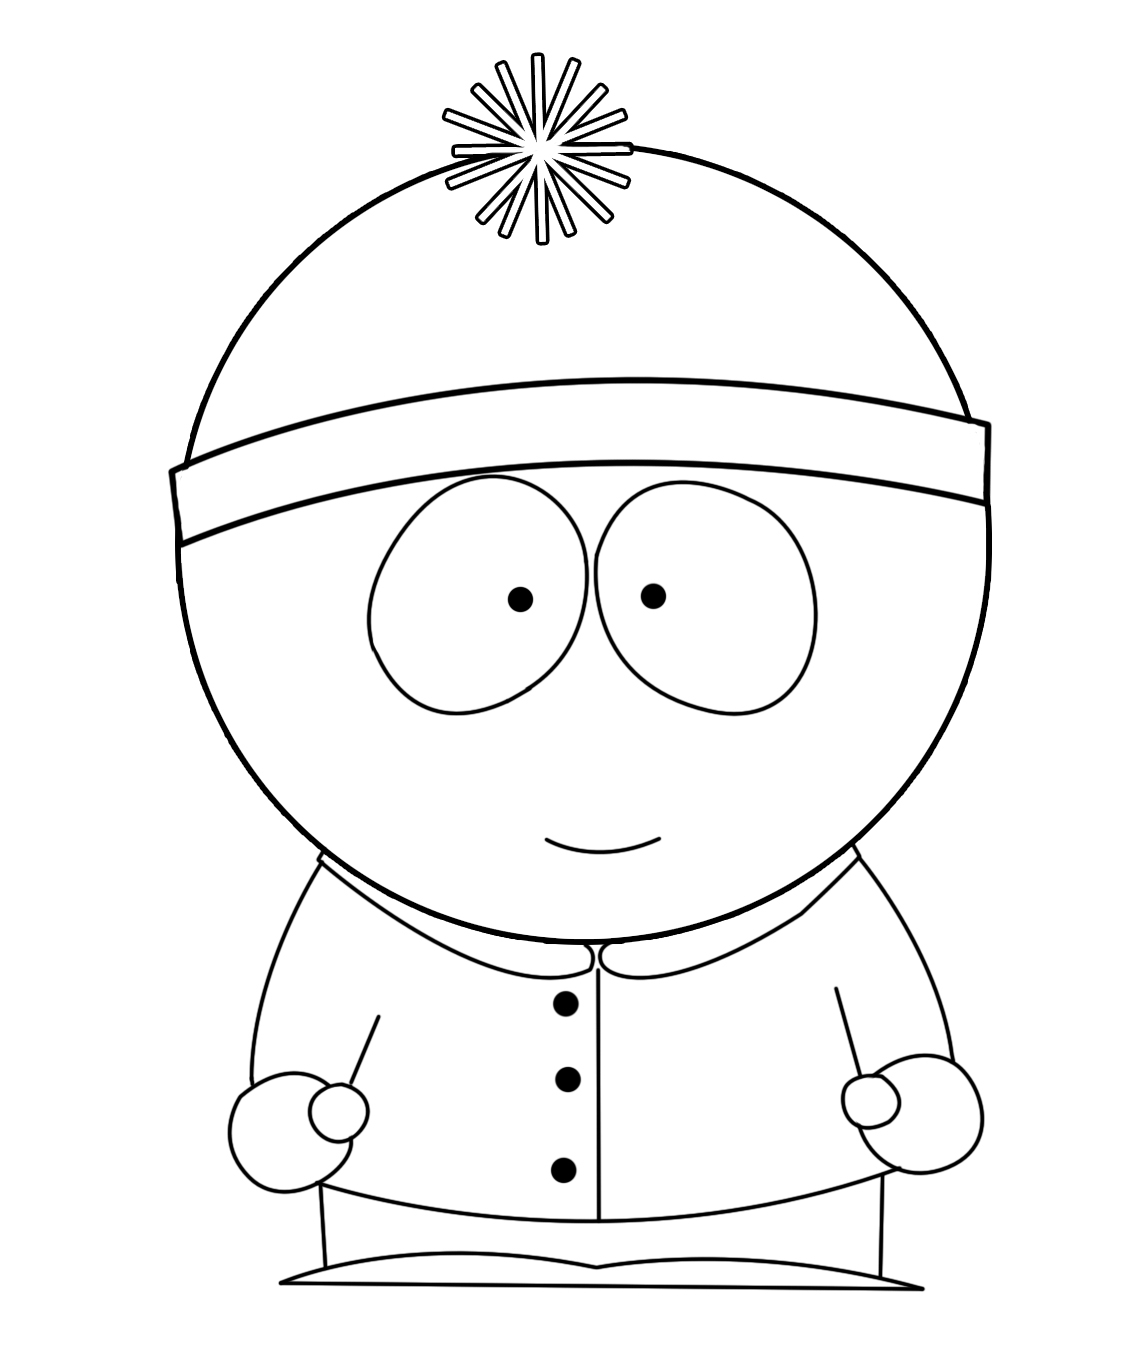 South park cartoons â free printable coloring pages